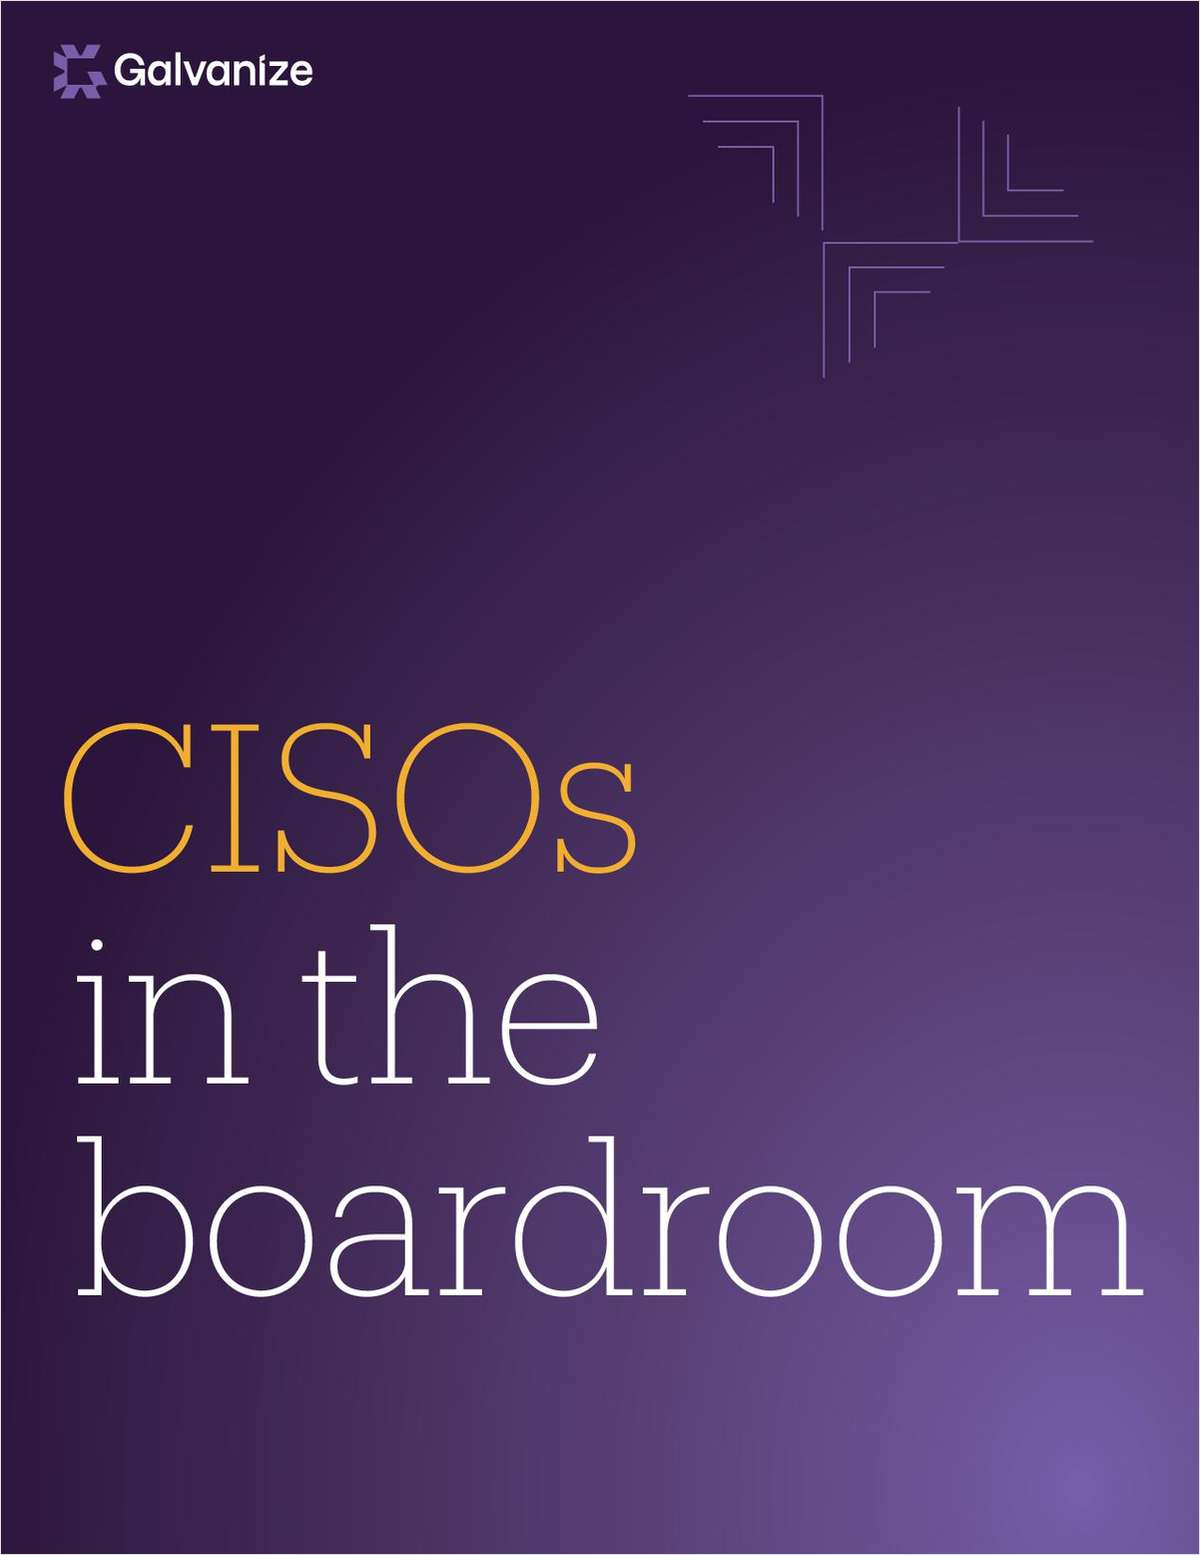 The Evolution Of The CISO